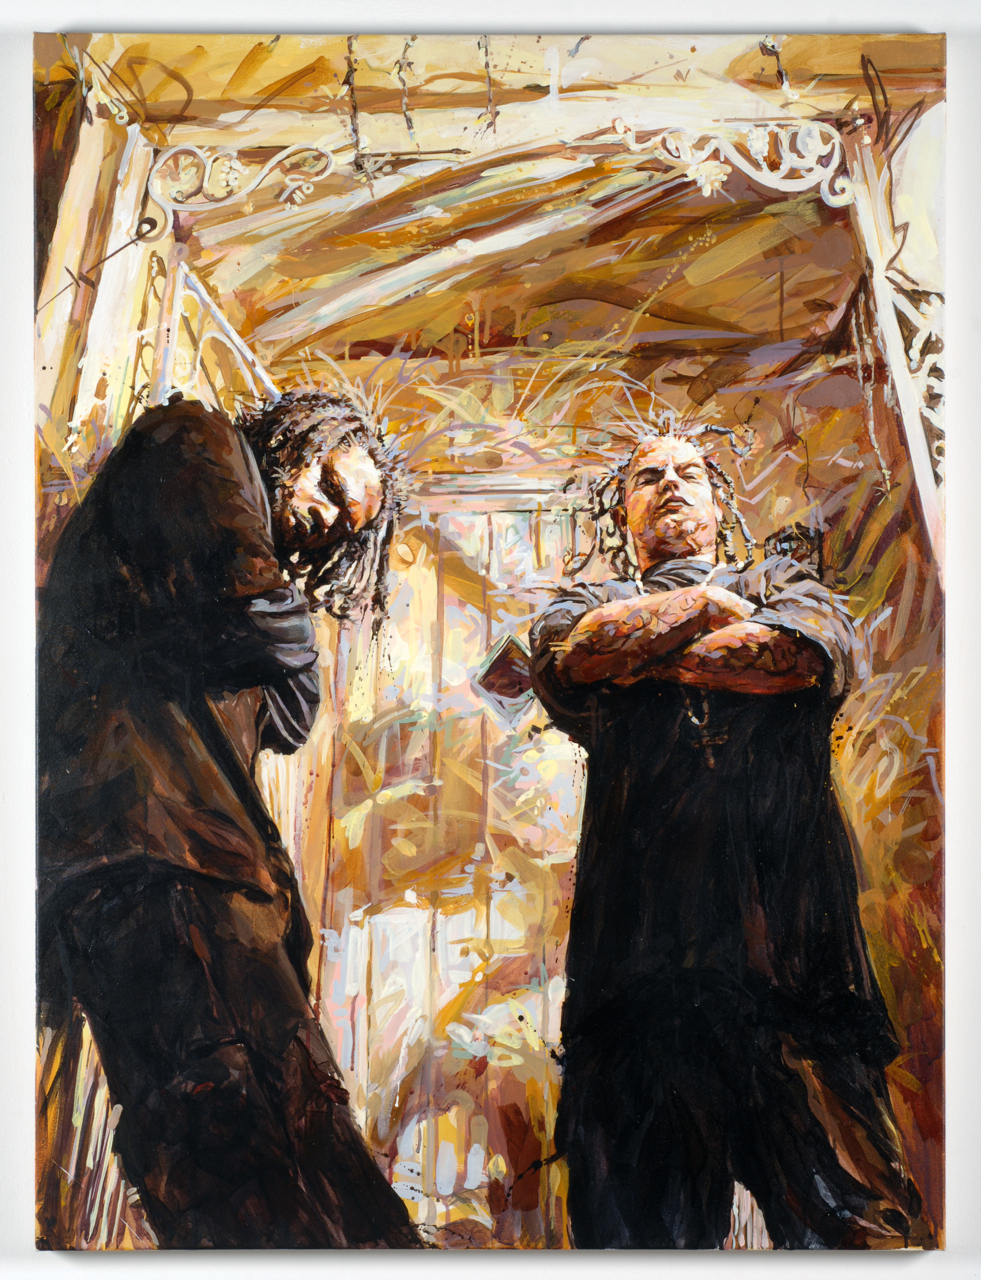  MICHAEL VASQUEZ  "The Guarded Entry" 2008  acrylic on canvas  48 x 36" 